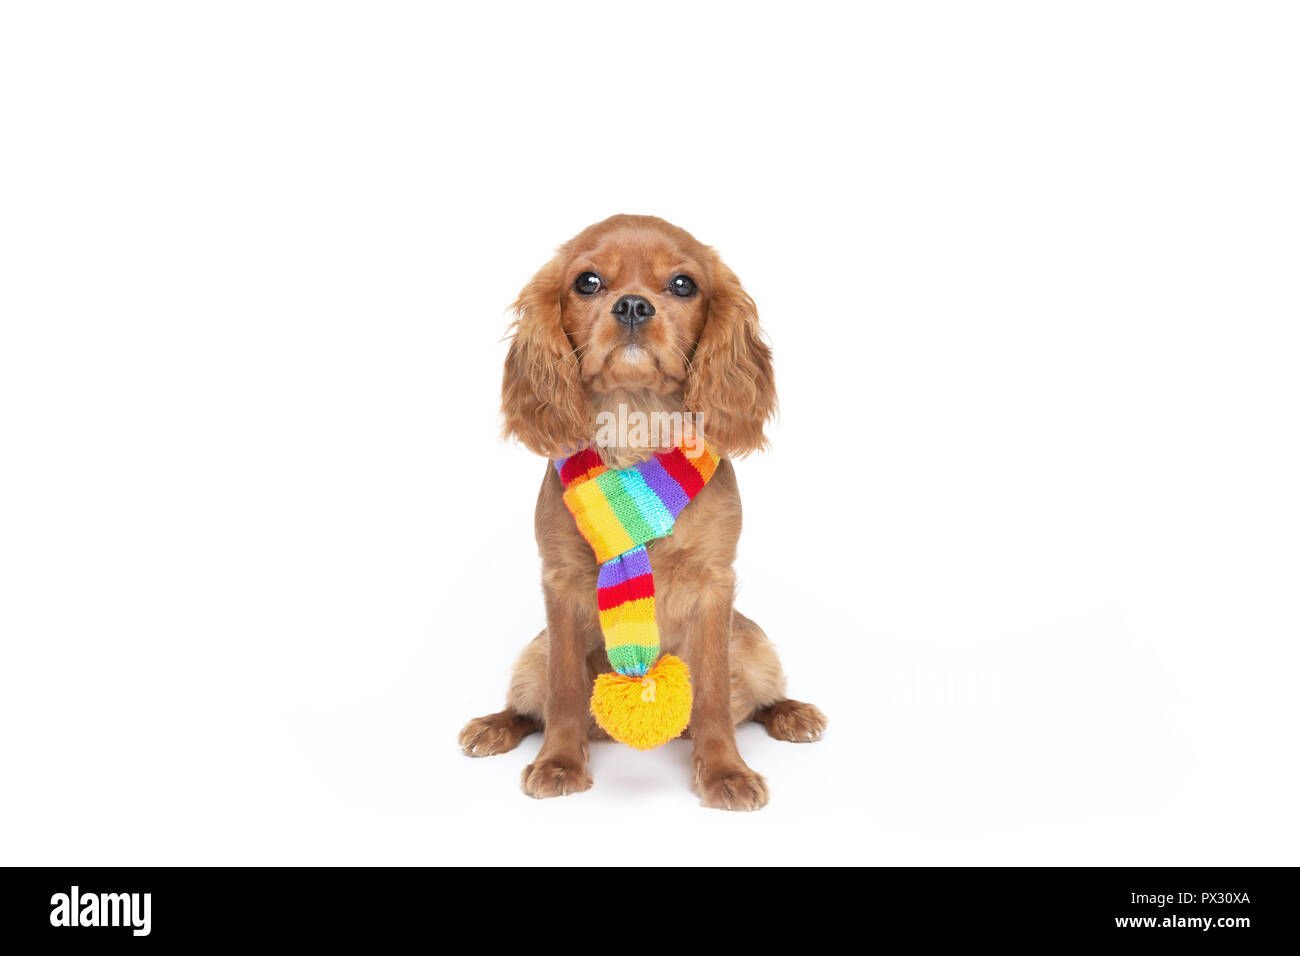 Cute dog in colorful scarf looking up isolated on white background Stock Photo